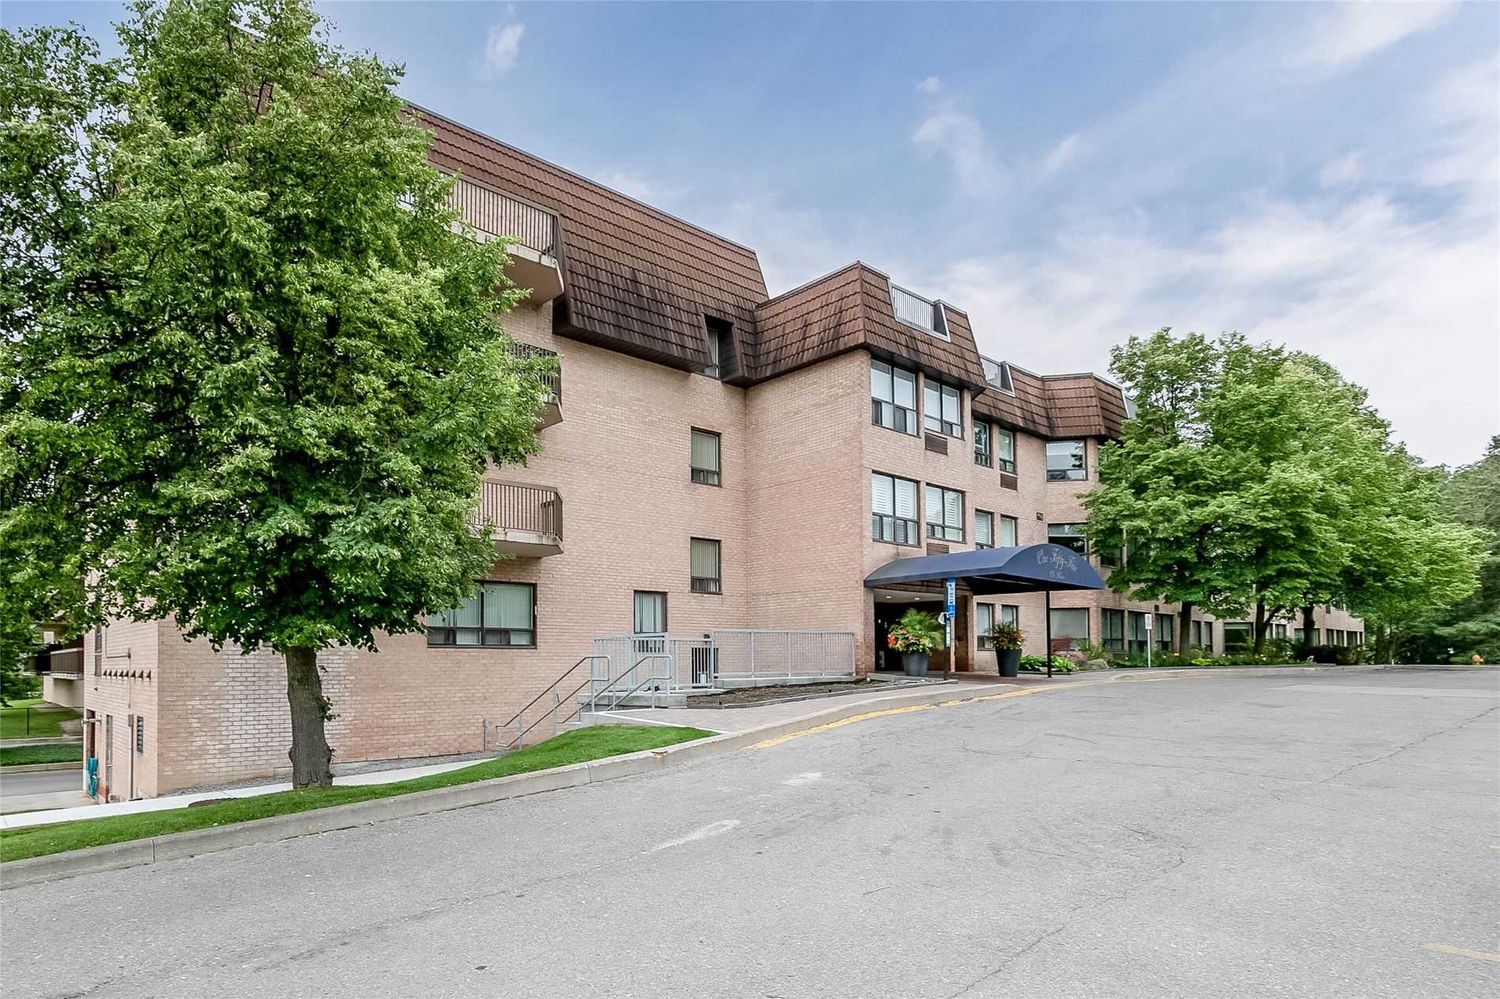 155 Main Street N. Heritage North Condos is located in  Newmarket, Toronto - image #1 of 2